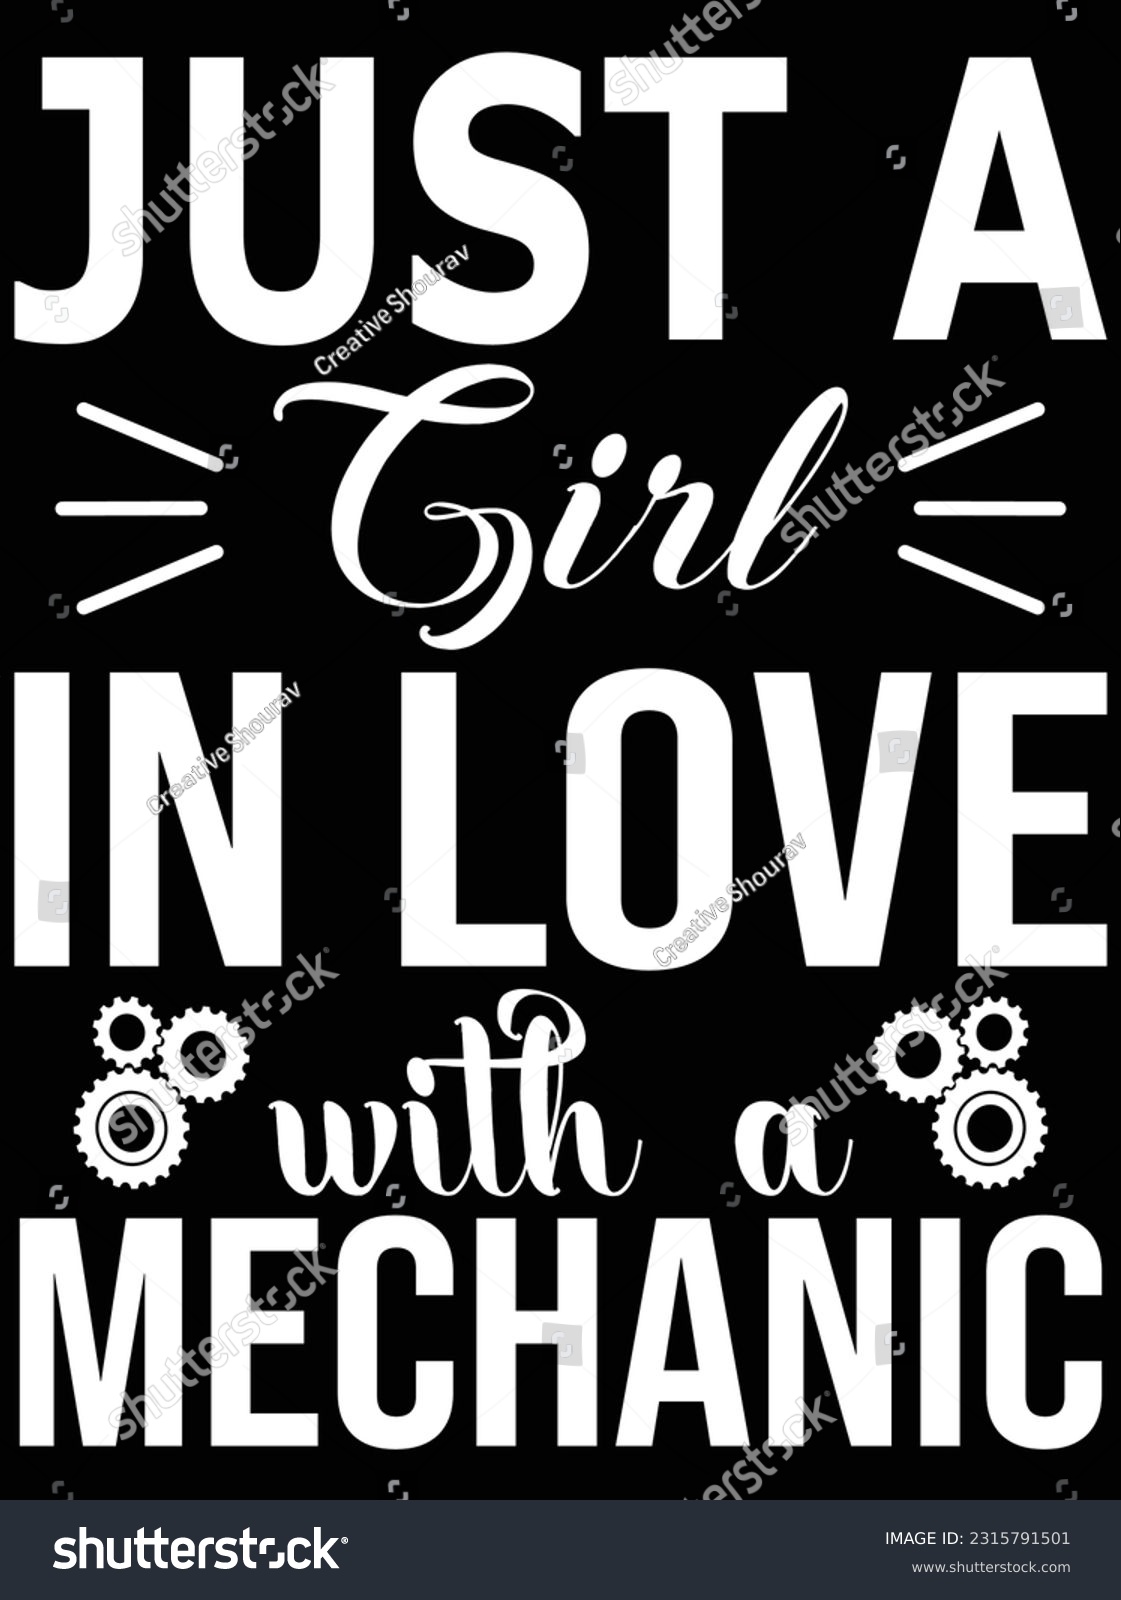 SVG of 
Just a girl in love with a mechanic vector art design, eps file. design file for t-shirt. SVG, EPS cuttable design file svg